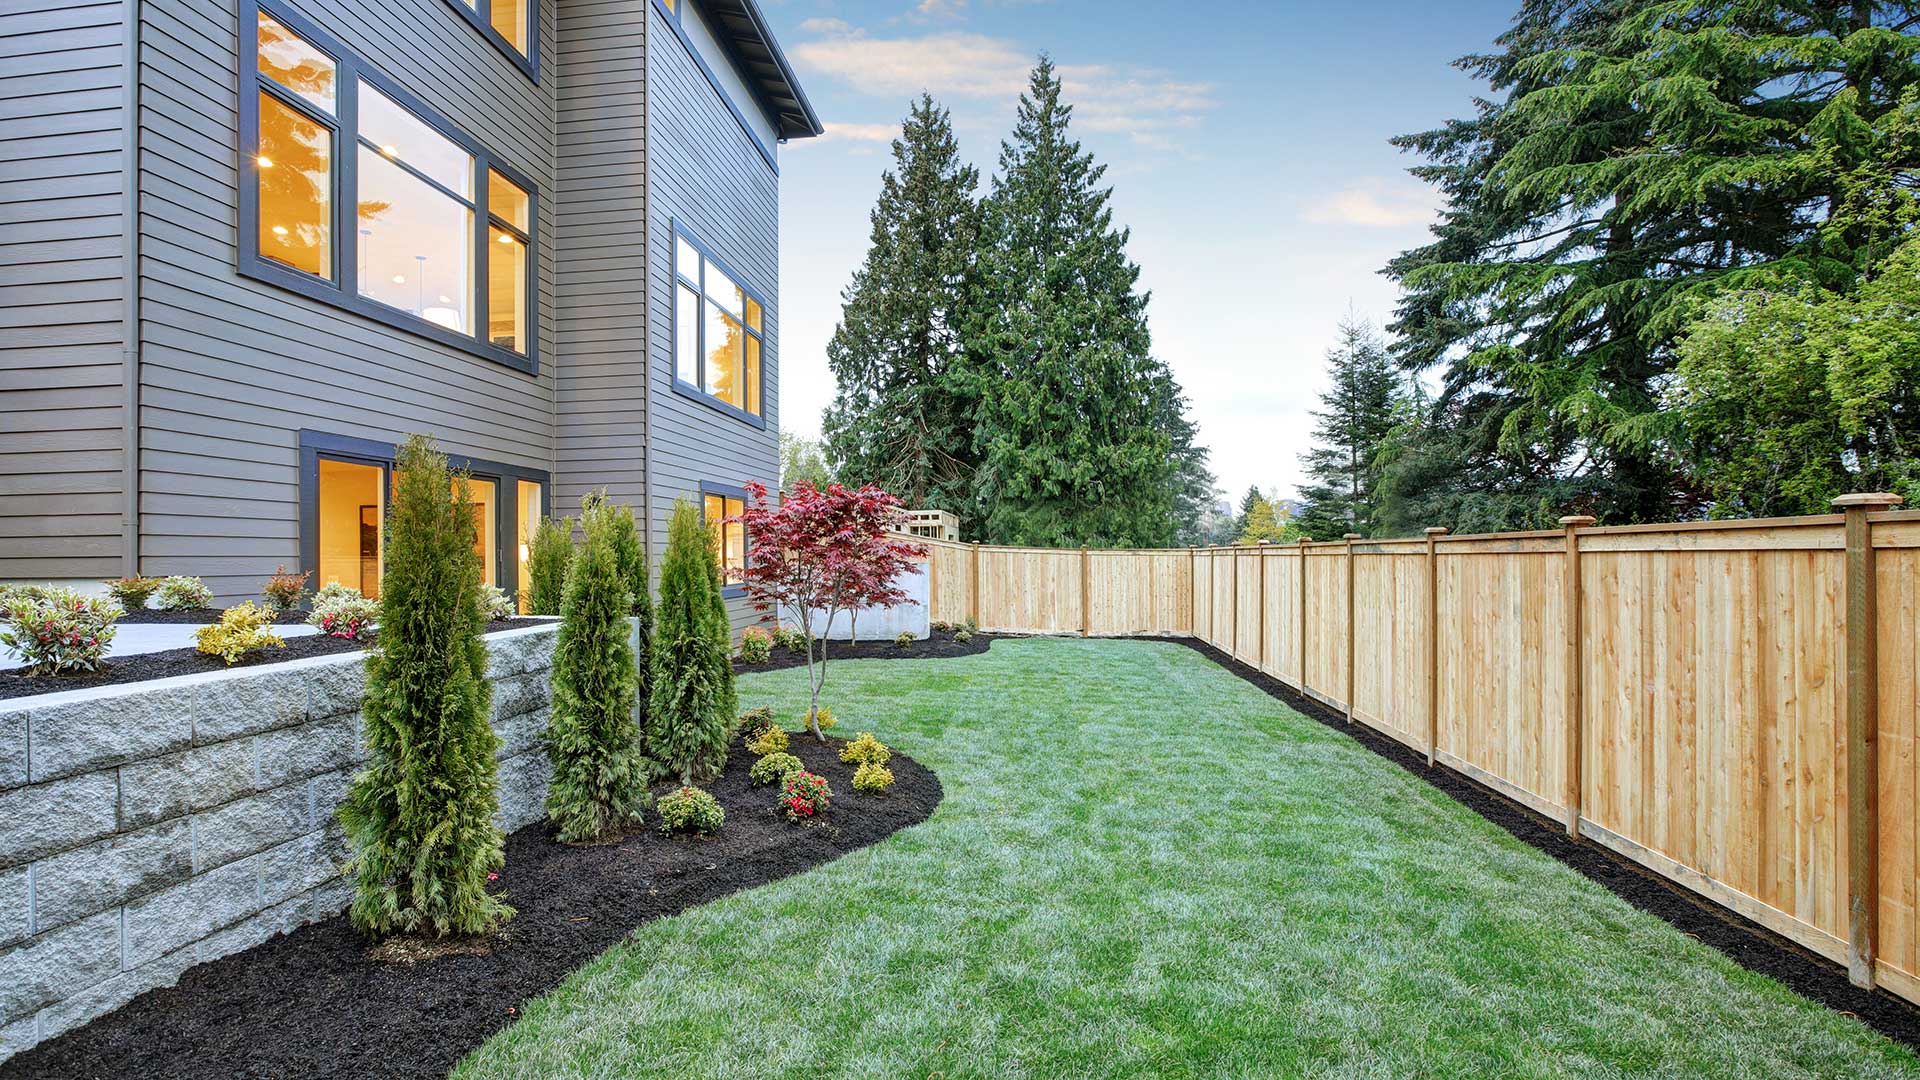 A side yard with neat landscaping at a home in Lents, OR.